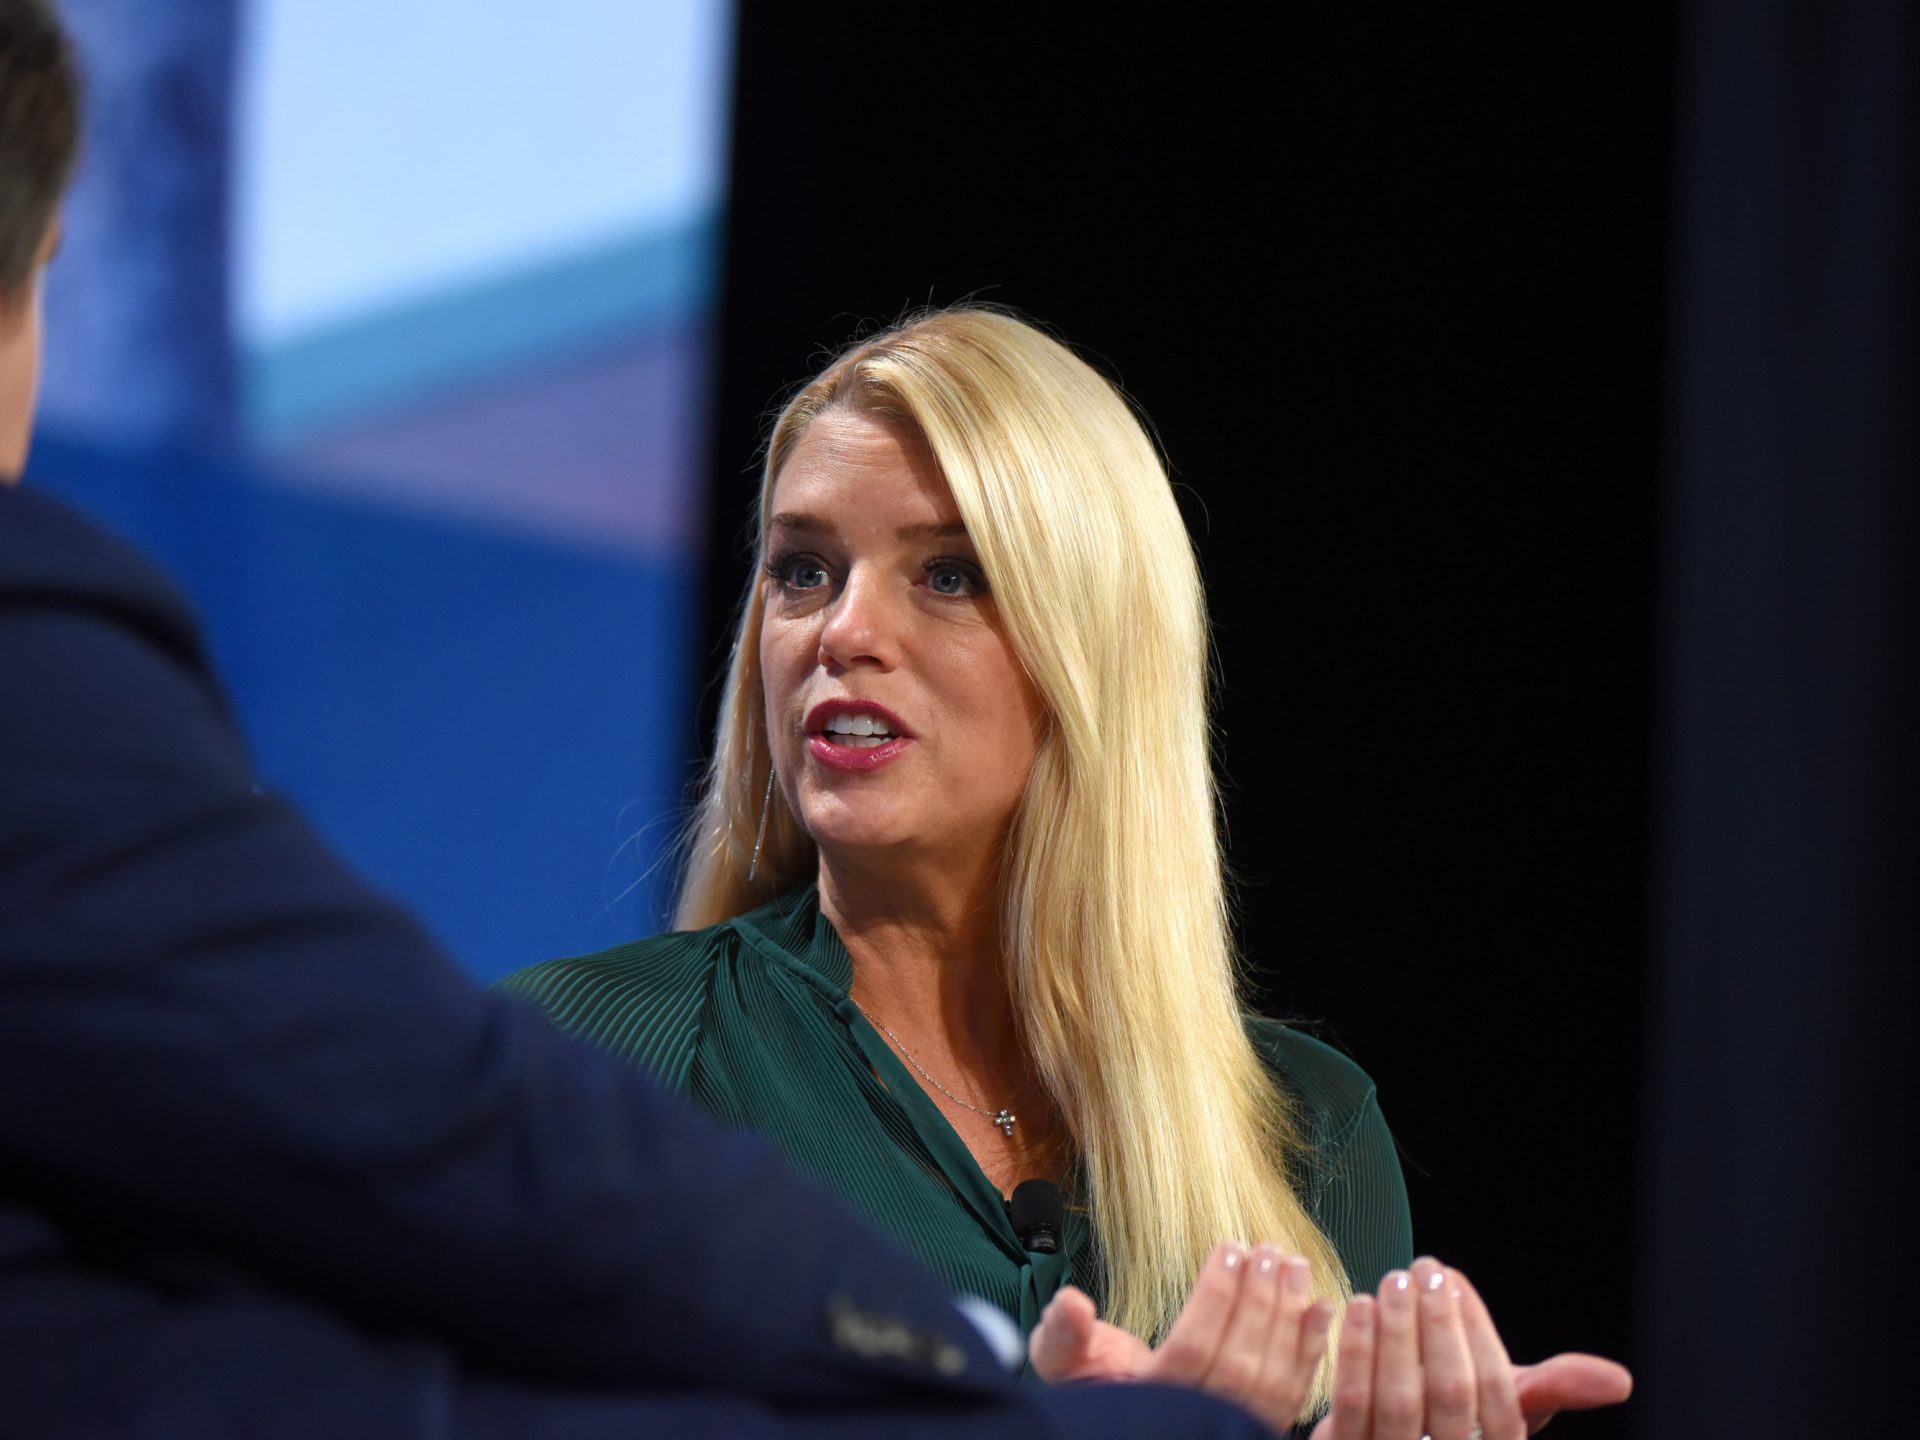 Pam Bondi, former Florida attorney general, moves from impeachment communications to the trial defense team.